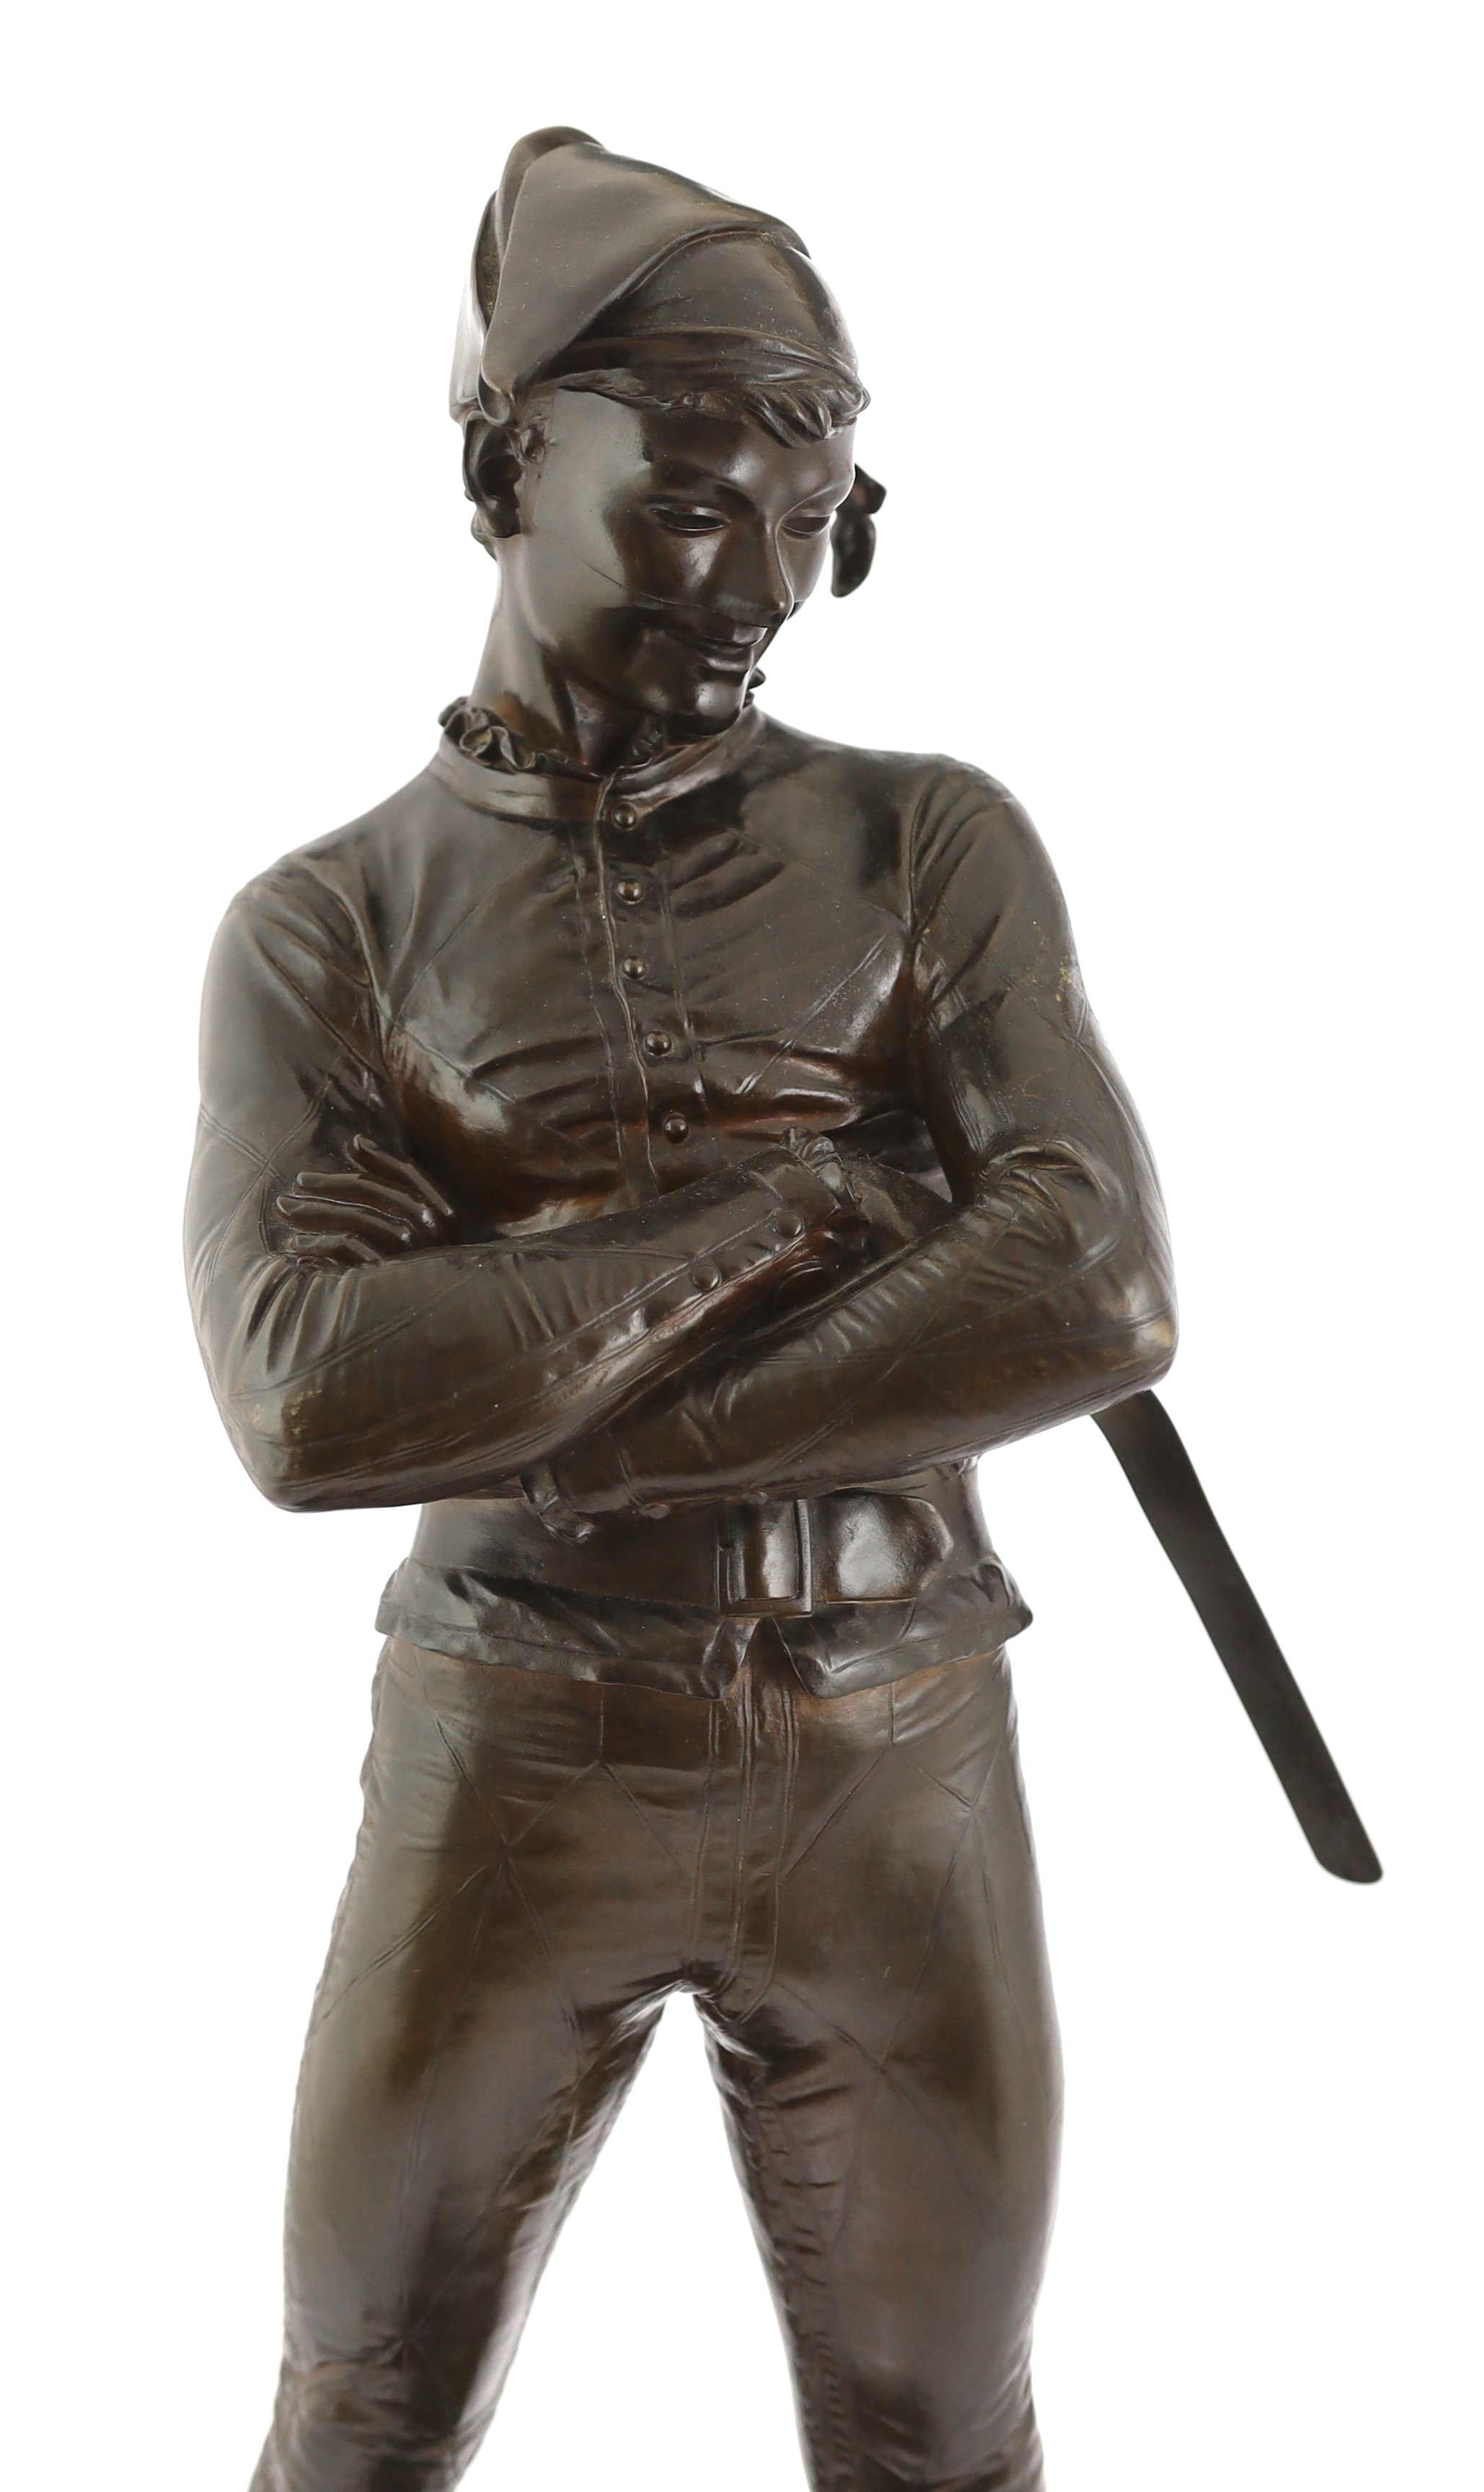 Charles Rene de St Marceaux (French, 1845-1915), a bronze figure of Harlequin